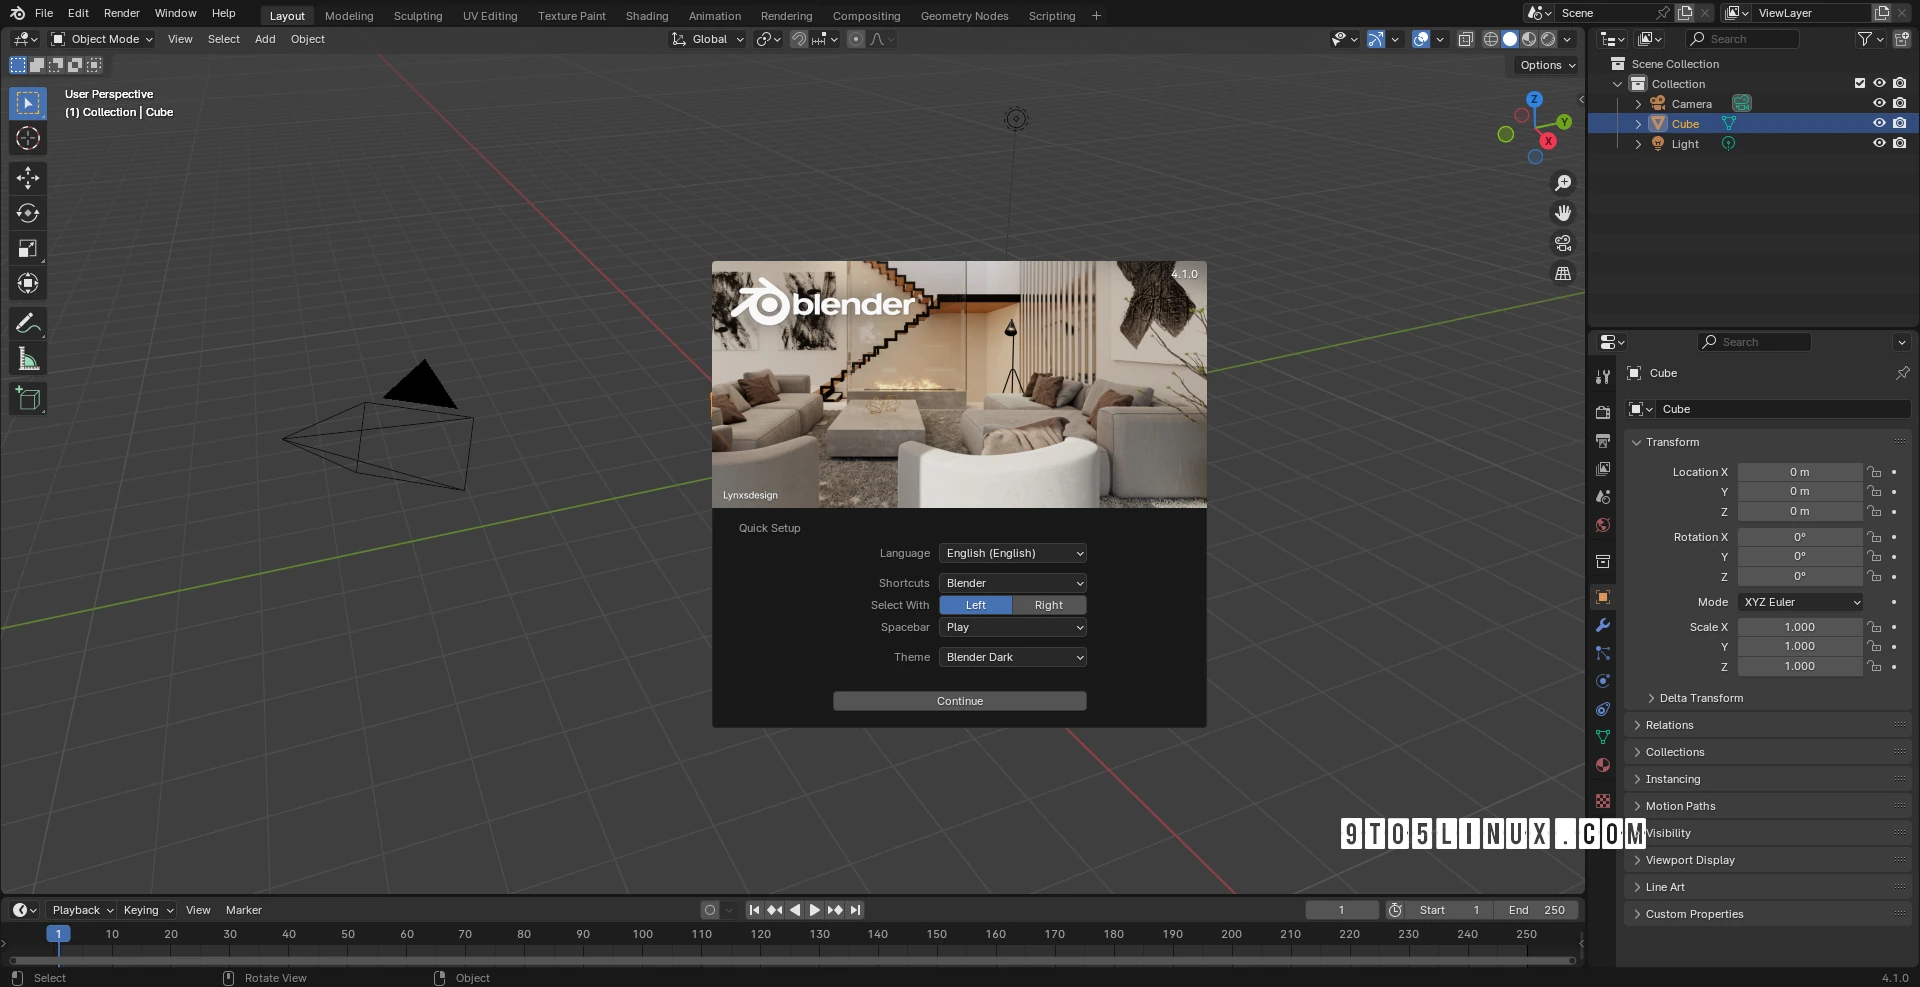 Blender 4.1 Officially Released with Quality-of-Life and Performance Improvements